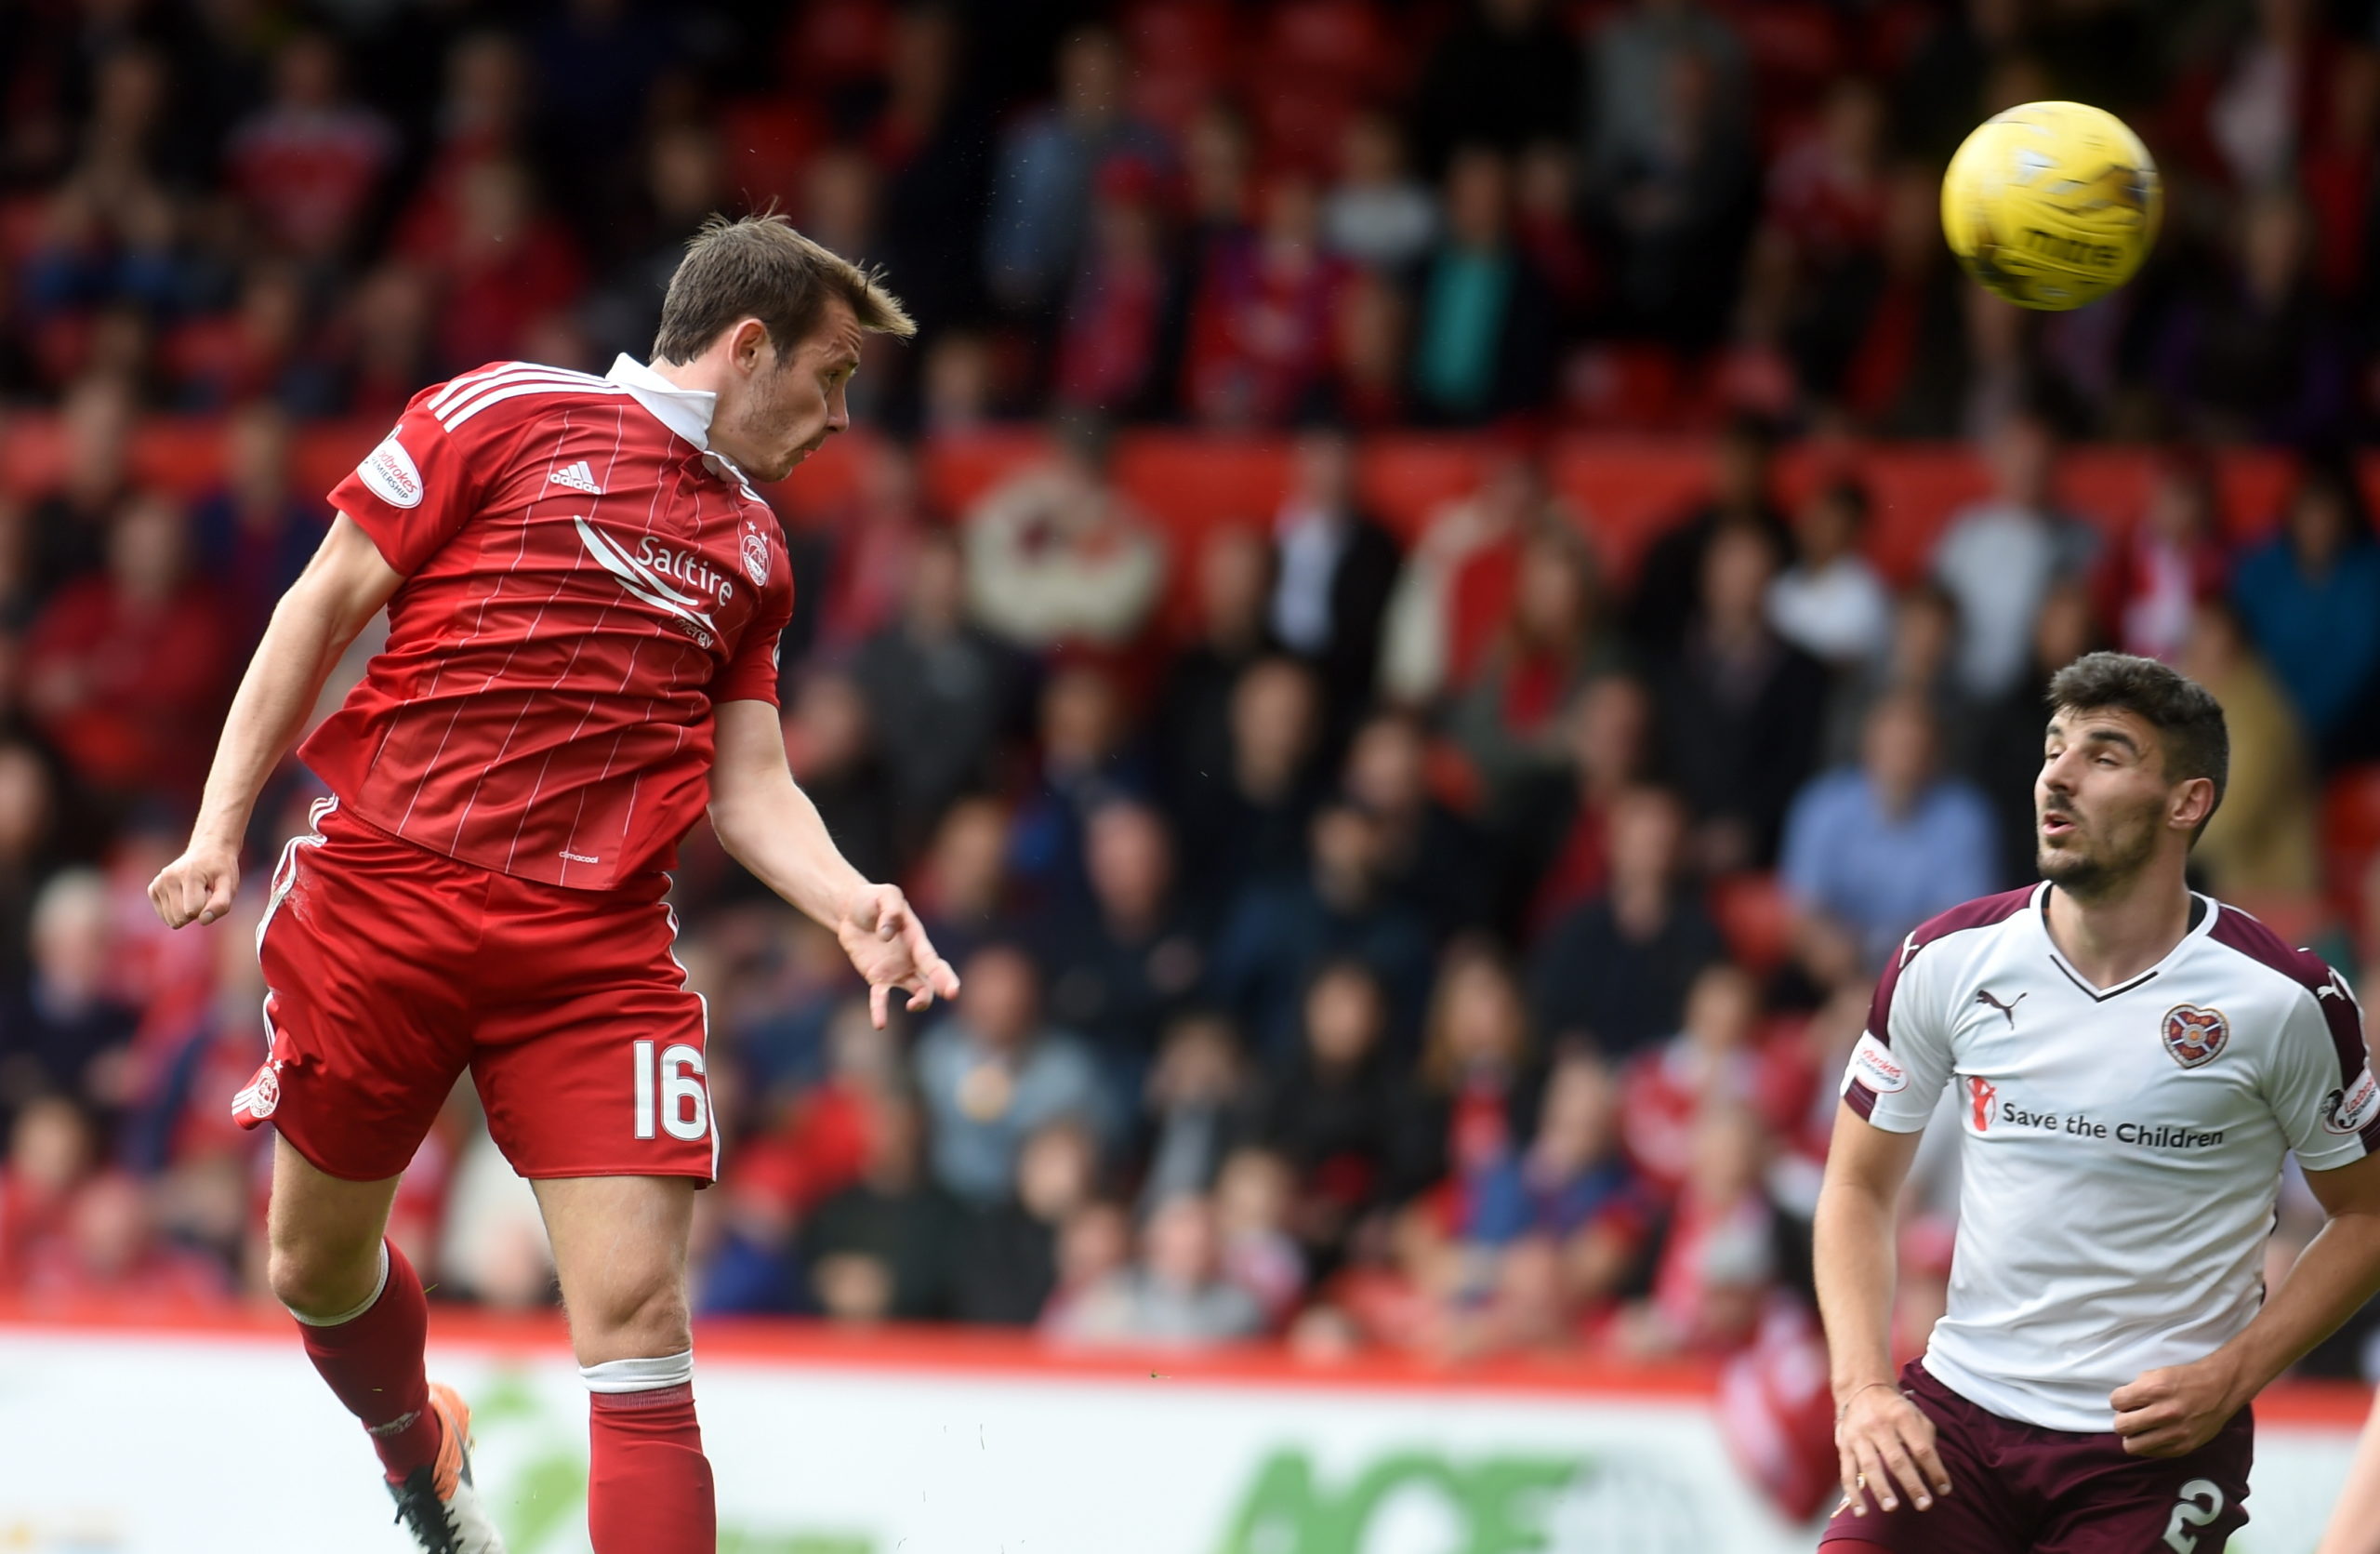 Peter Pawlett in action against Hearts.